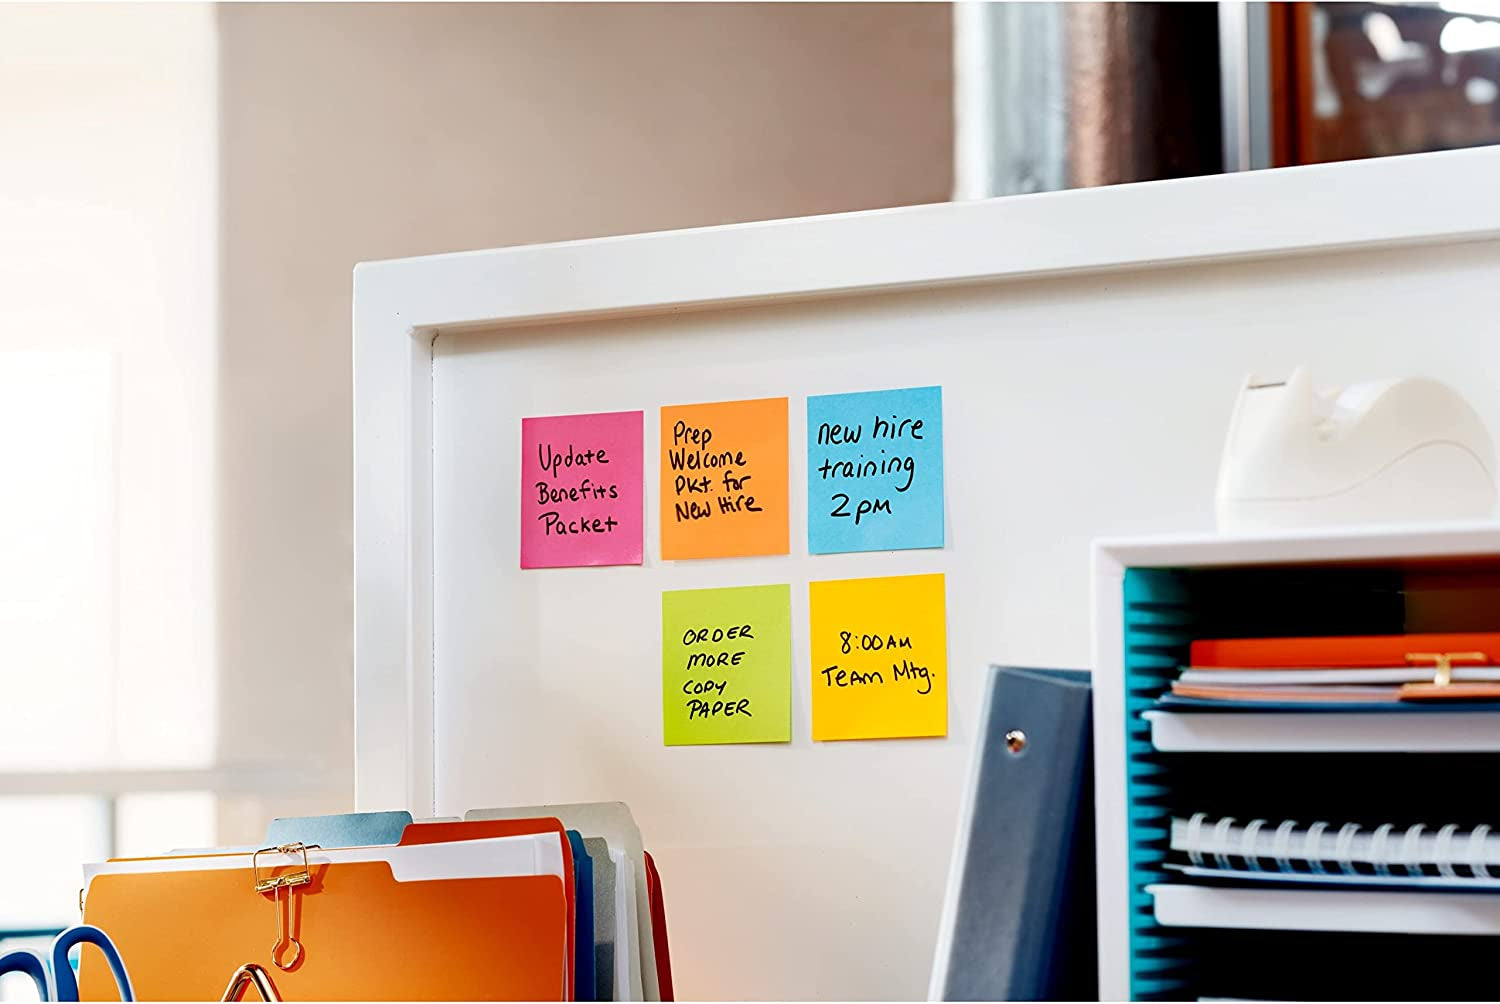 Super Sticky Notes, 3 Sticky Note Pads, 3 X 3 In., School Supplies for Students, Ideal for Textbooks, Notebooks, Walls and Vertical Surfaces, Energy Boost Collection